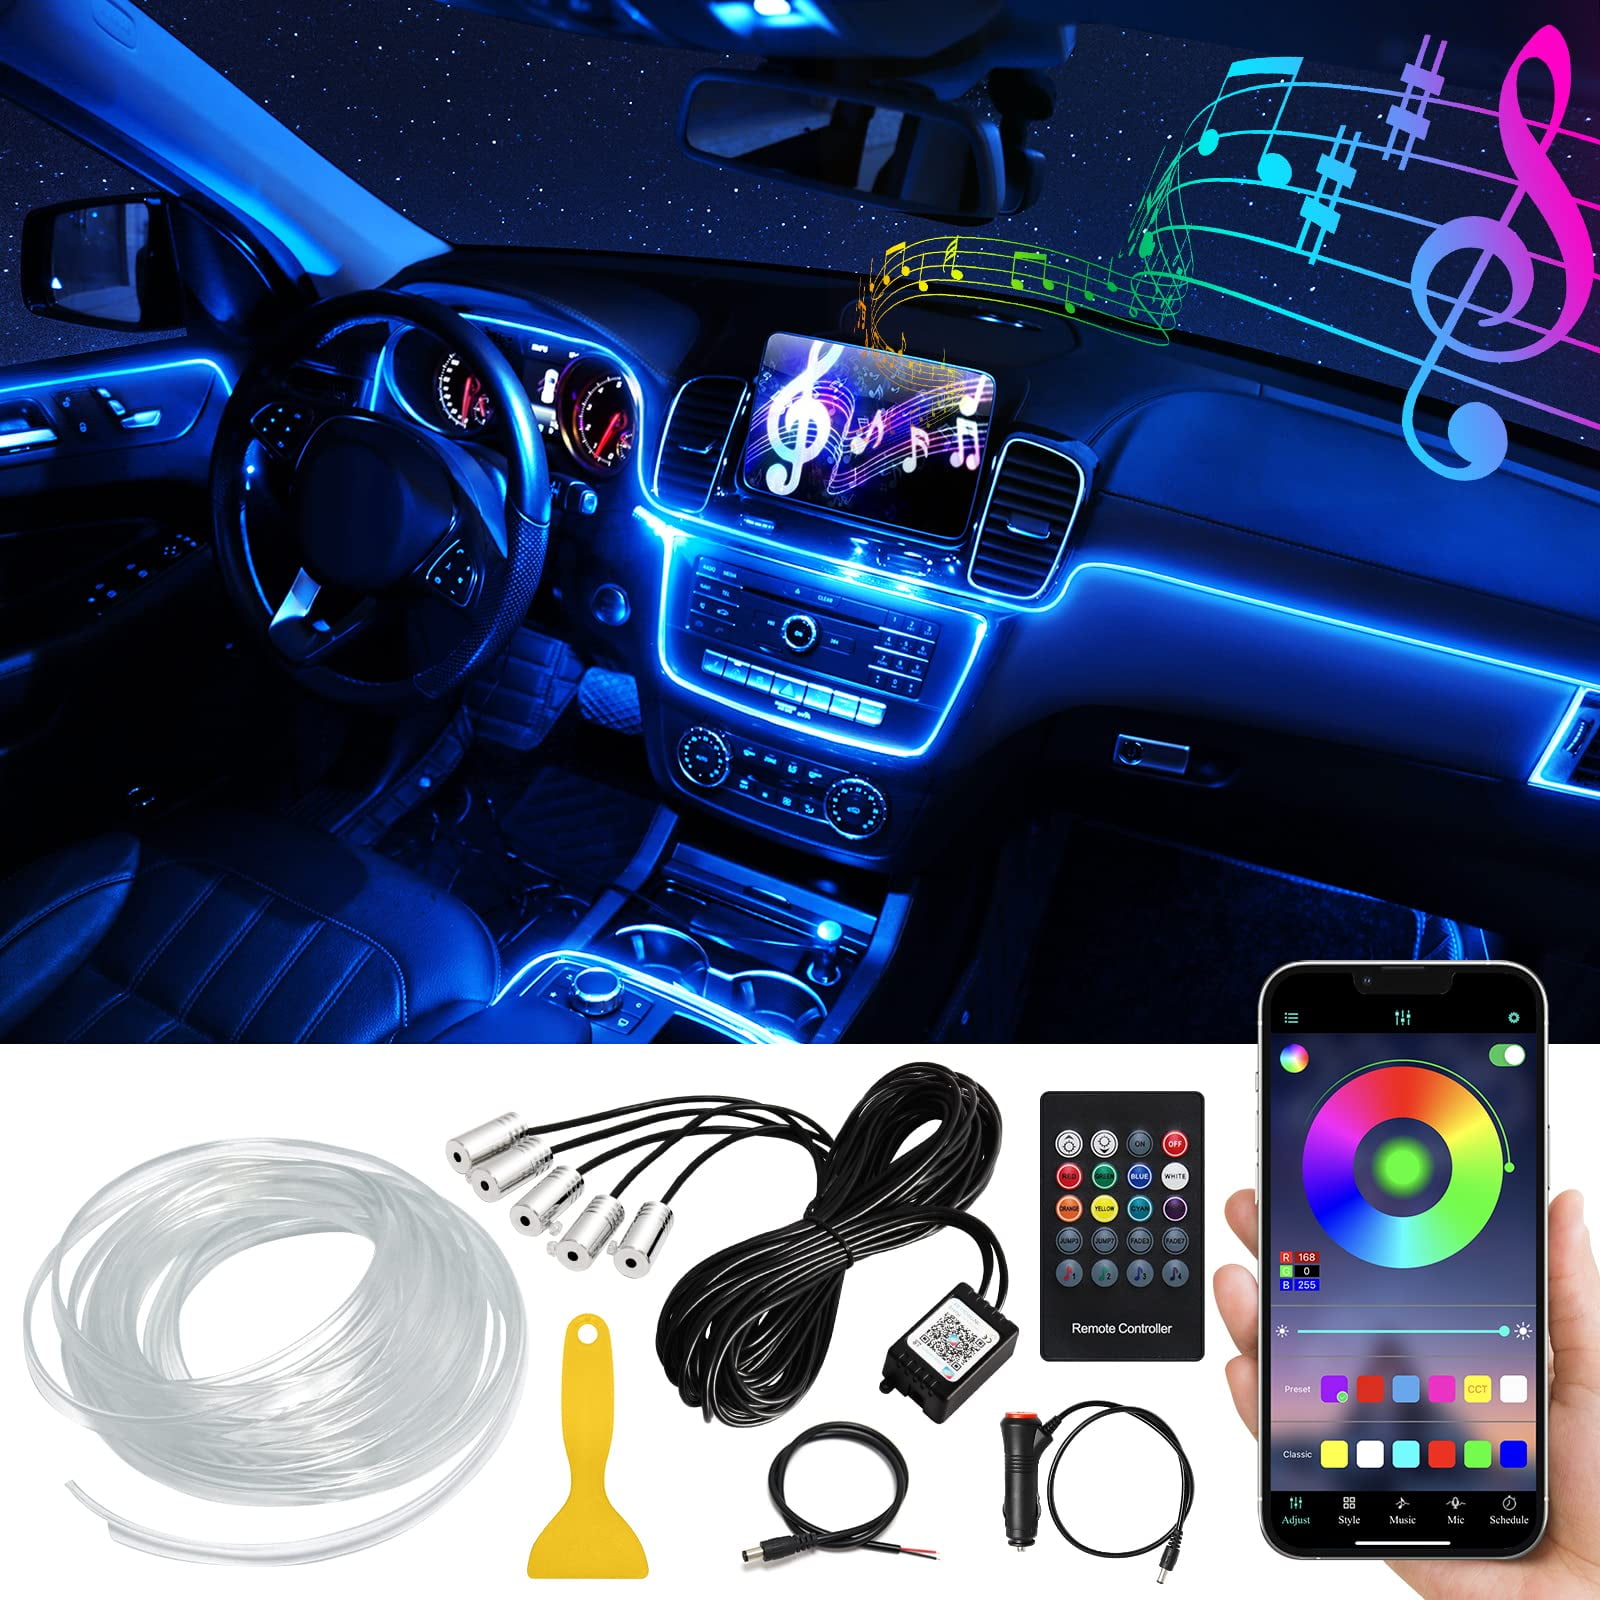  MAODANER Car LED Interior Strip Light, 16 Million Colors 5 in 1  with 236 inches Fiber Optic, Multicolor RGB Sound Active Automobile  Atmosphere Ambient Lighting Kit - Wireless Bluetooth APP Control :  MAODANER: Automotive